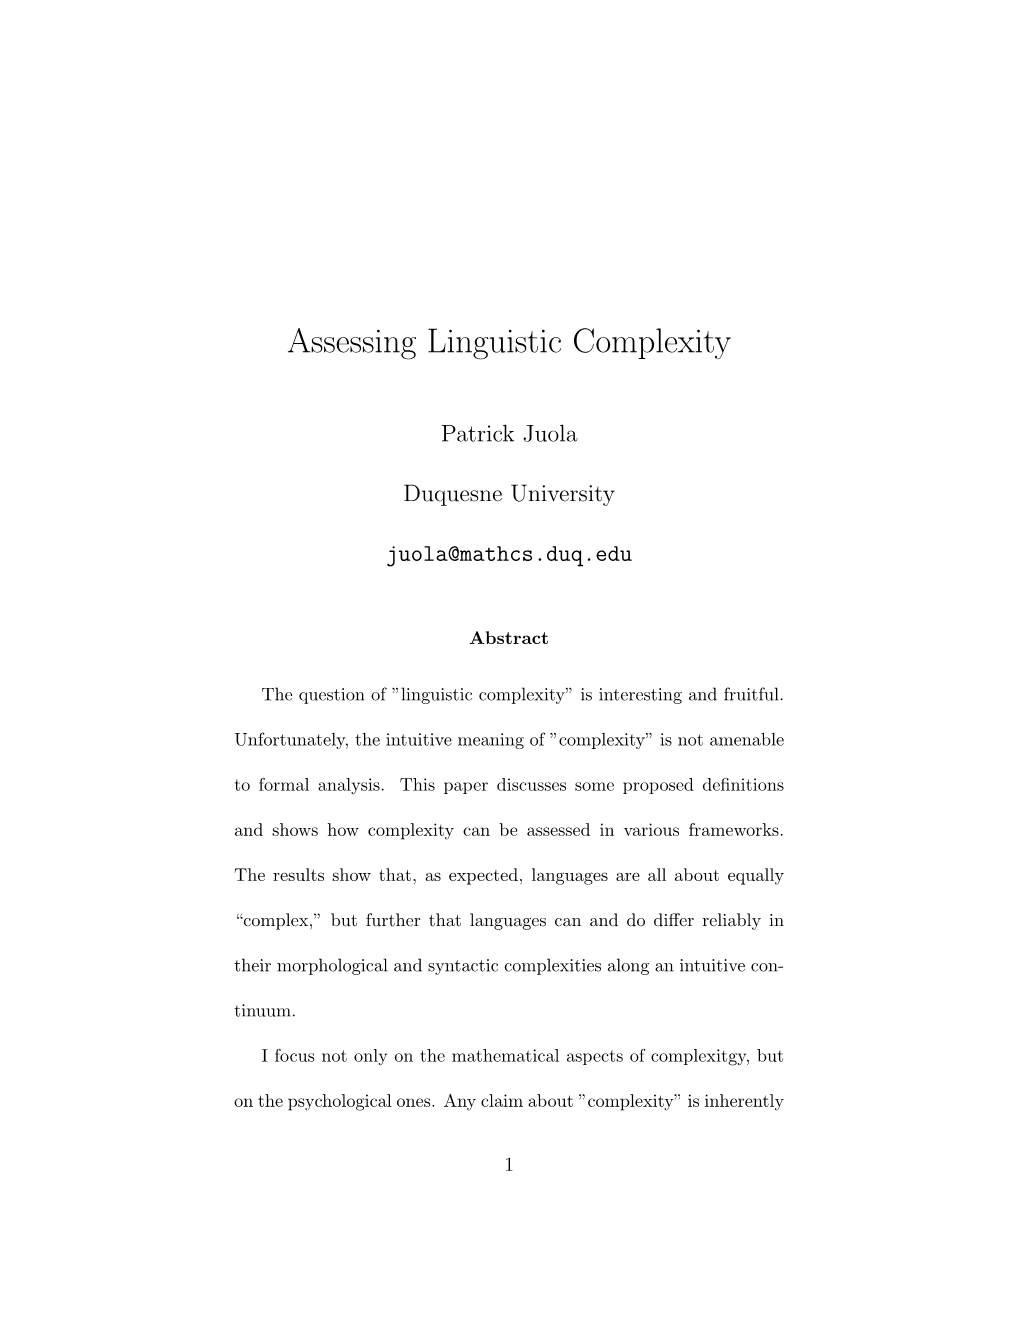 Assessing Linguistic Complexity